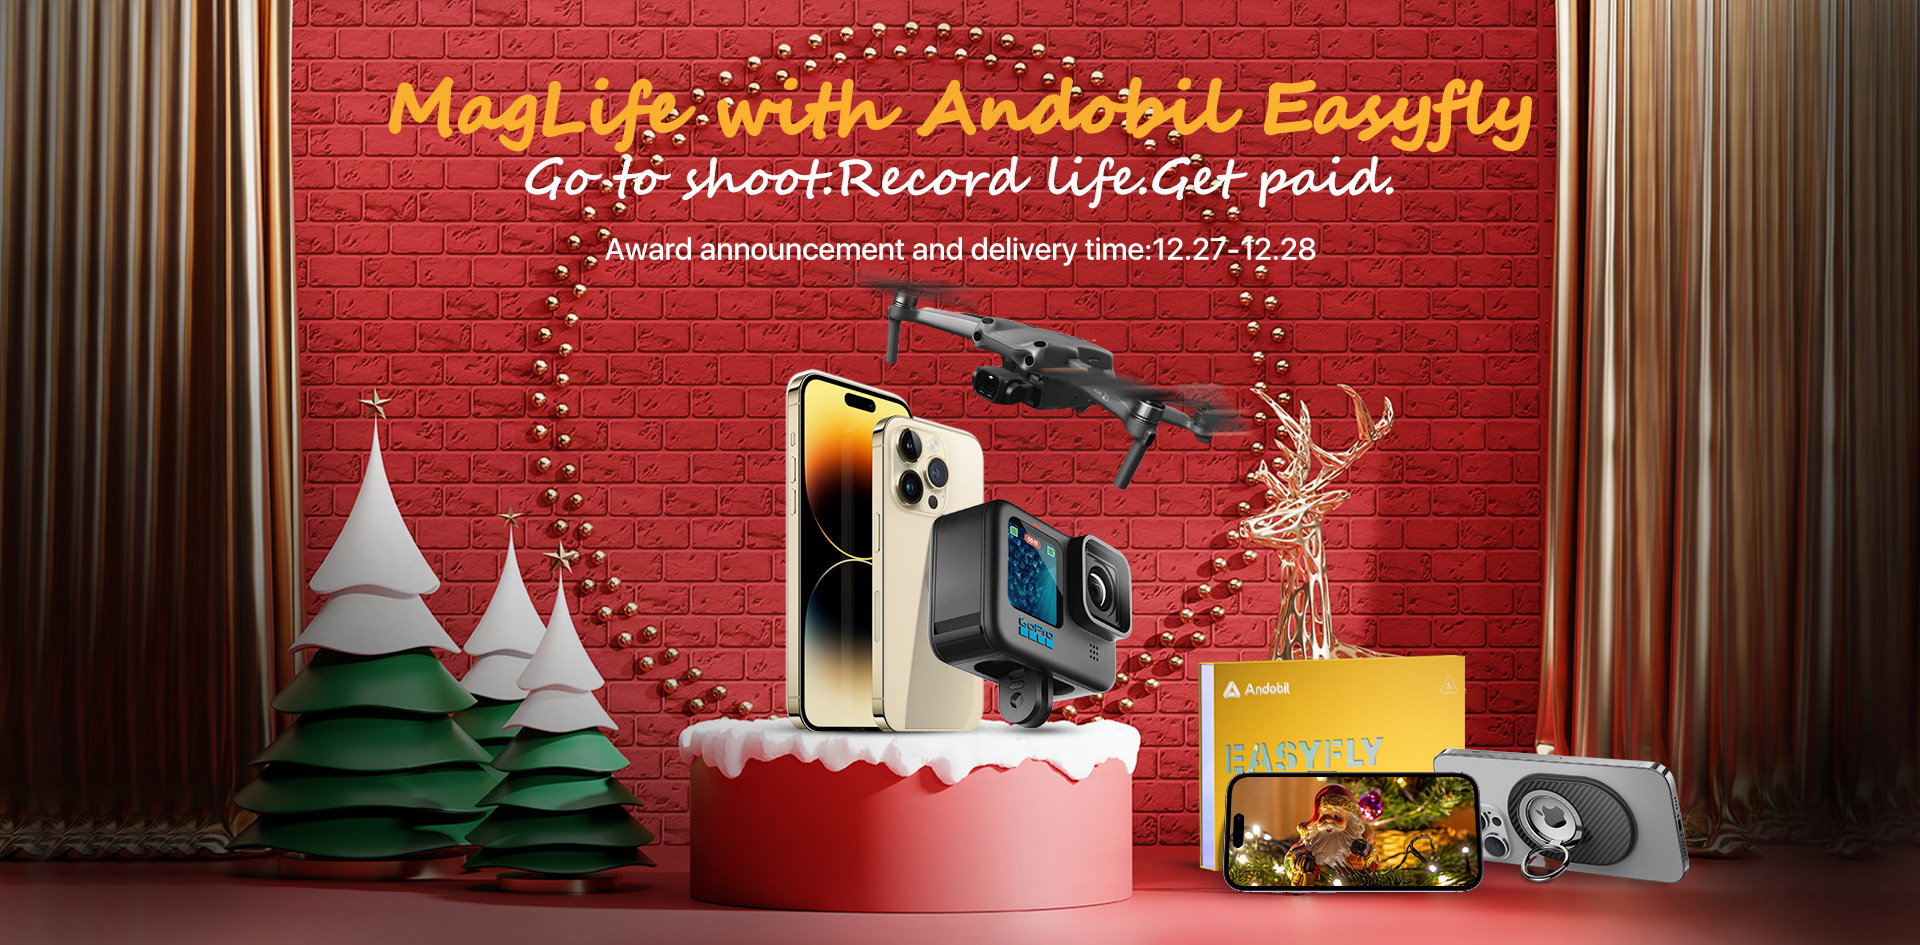 MagLife with Andobil Easyfly Christmas is officially over